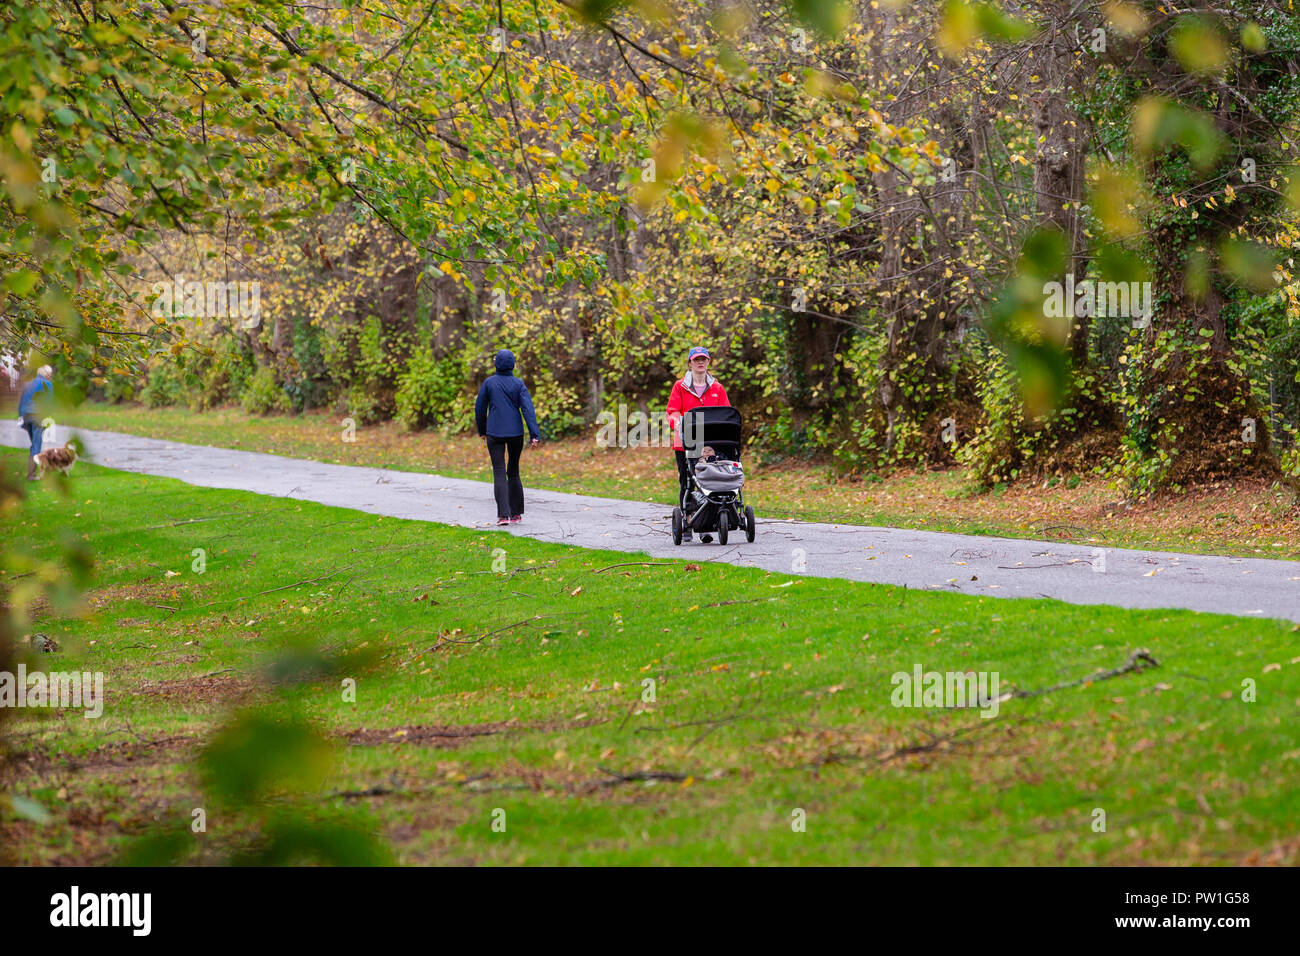 Celbridge, County Kildare, Ireland. 12th Oct, 2018: The aftermath of Storm Callum in the Castletown Park, Celbridge. Calm morning and couple of fallen branches but no major damage to the forestry. People out walking and jugging before the heavy rain foretasted for the afternoon as Storm Callum moves across Ireland. Credit: Michael Grubka/Alamy Live News Stock Photo